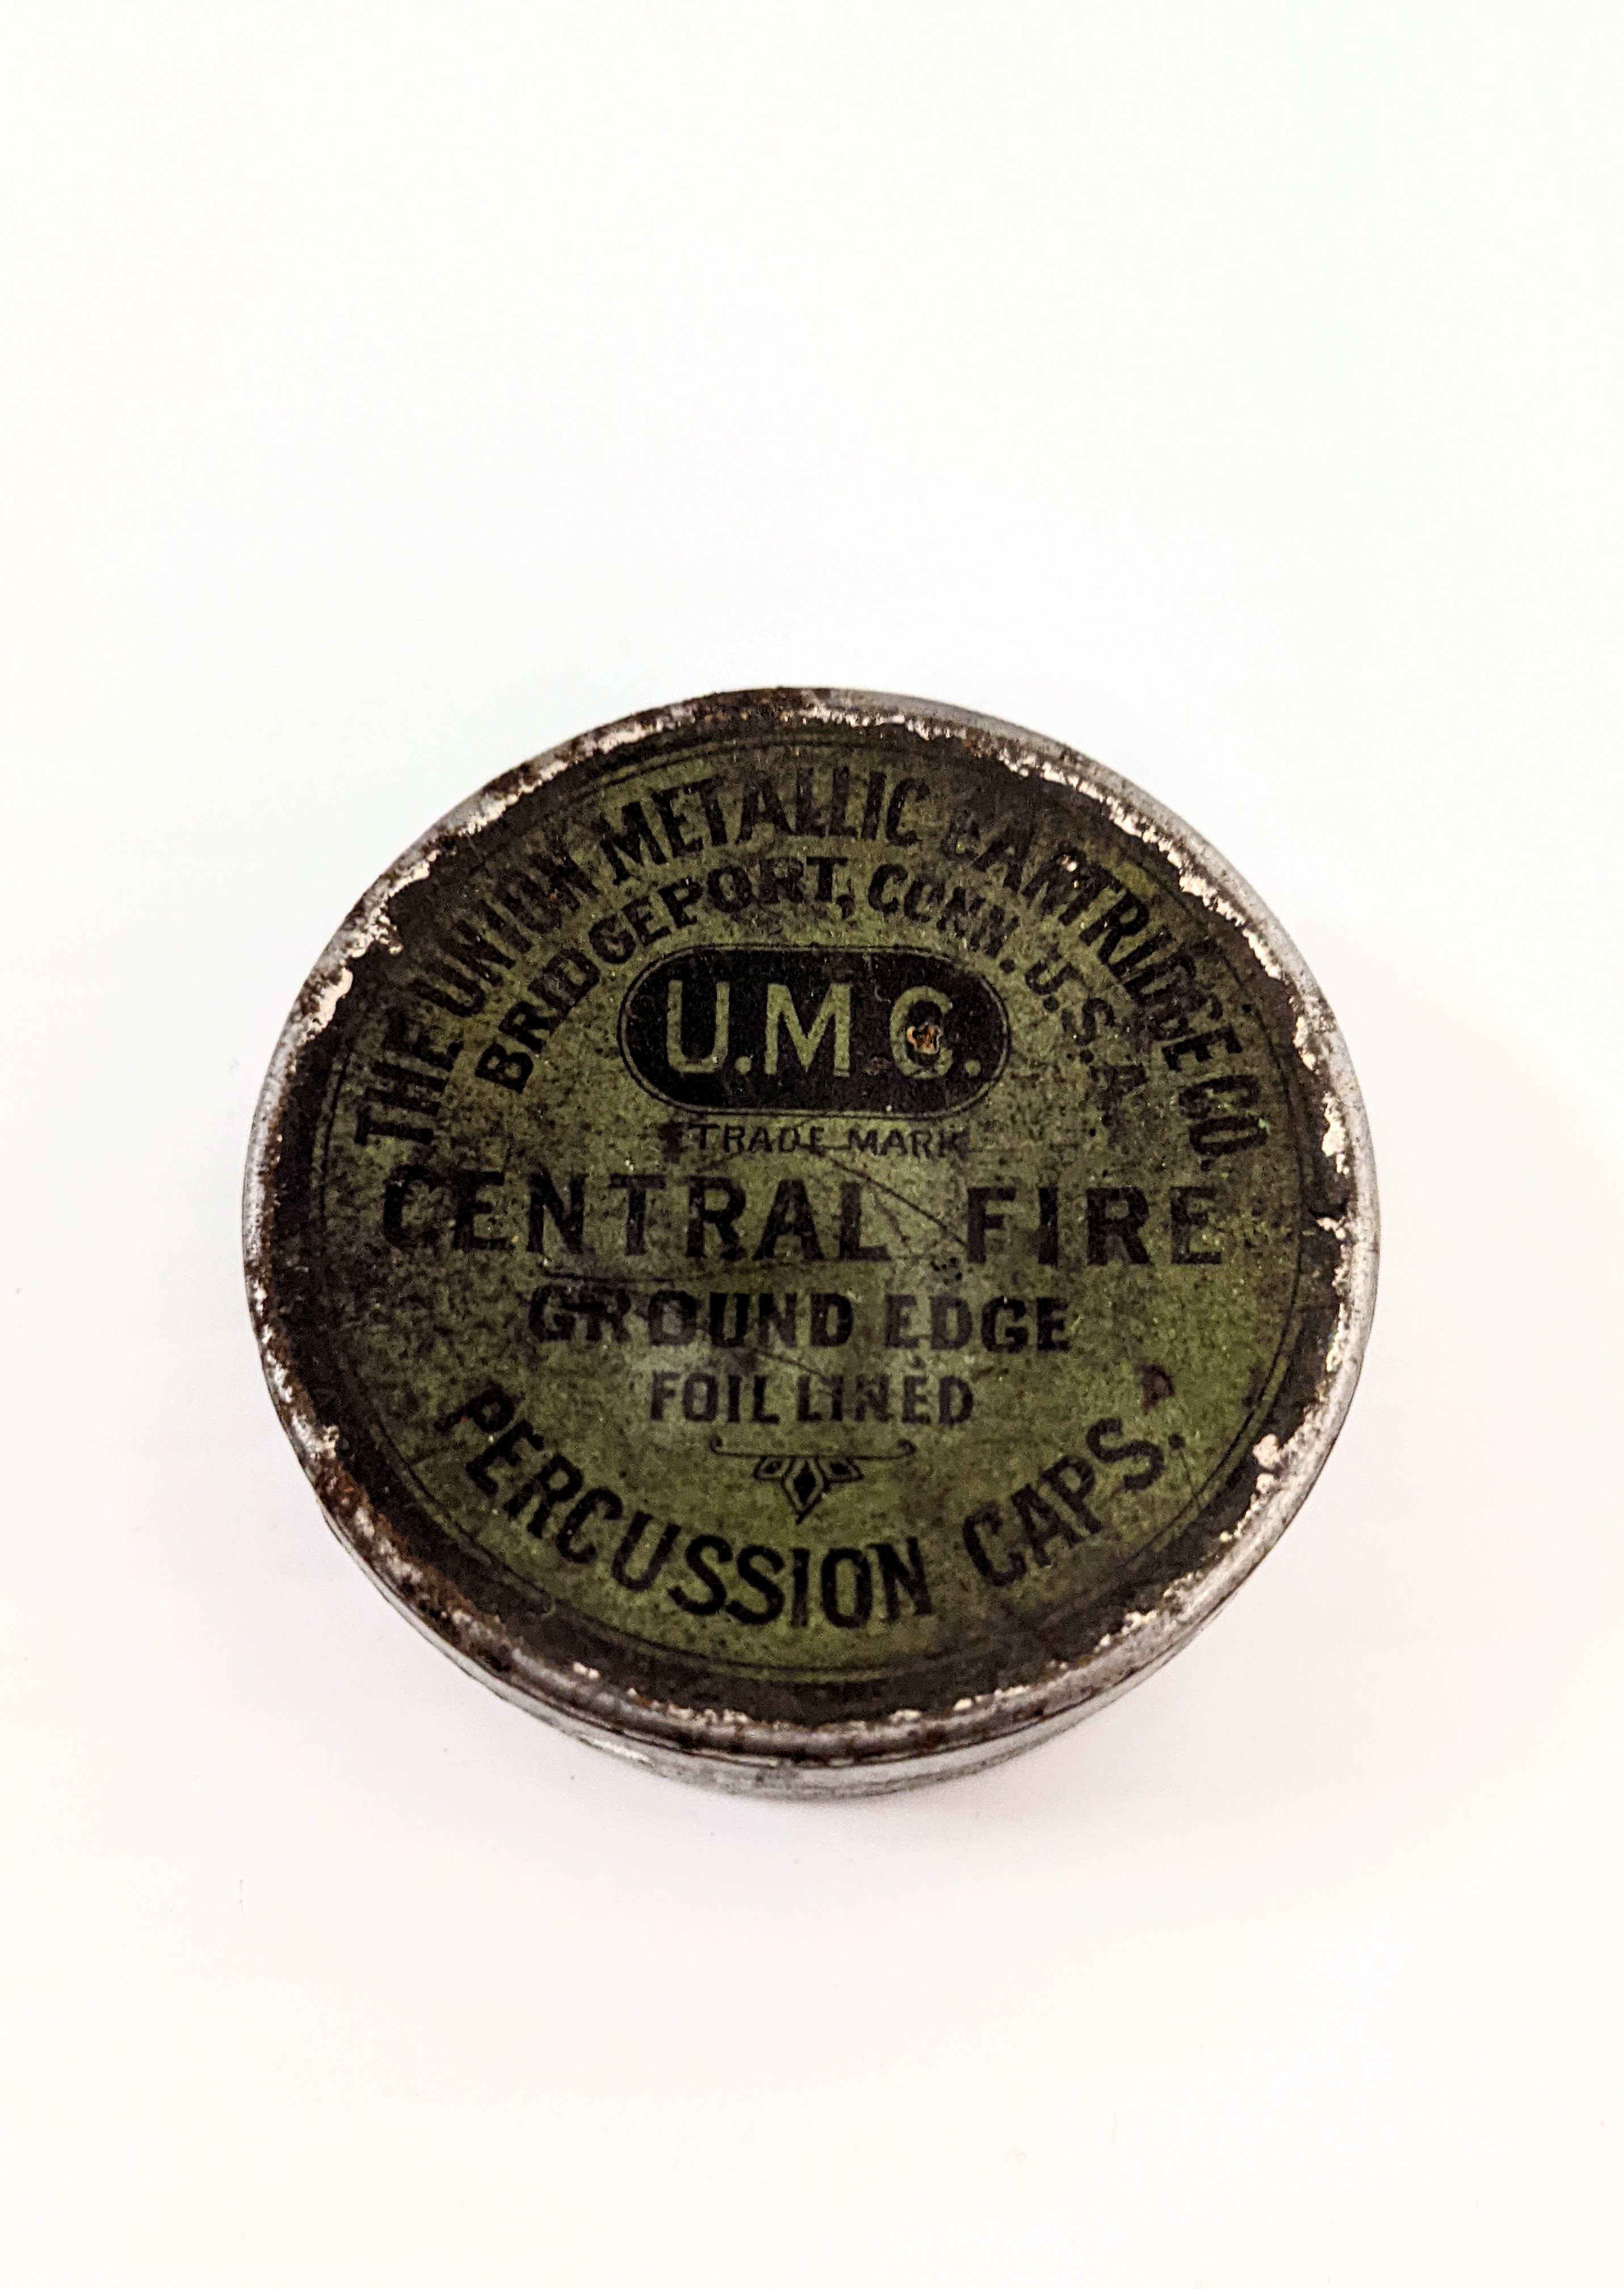 This small metal tin is a container for Blasting Caps. Made by the Union Metallic Cartridge Company of Conn. USA these caps were integral to the firing of a rifle. These small caps were integral to the cap lock mechanism of ignition for firearms. They contain a small about of fulminates which explode and create sparks upon impact of a hammer - these sparks would then ignite the main powder charge and fire the cartridge. The hammer of a modern firearm ignites the powder charge of a cartridge directly thus removing a step - and the need for blasting caps!
2007.61.01.22 / Tourangeau, Martha & Harvey
18/07/2022